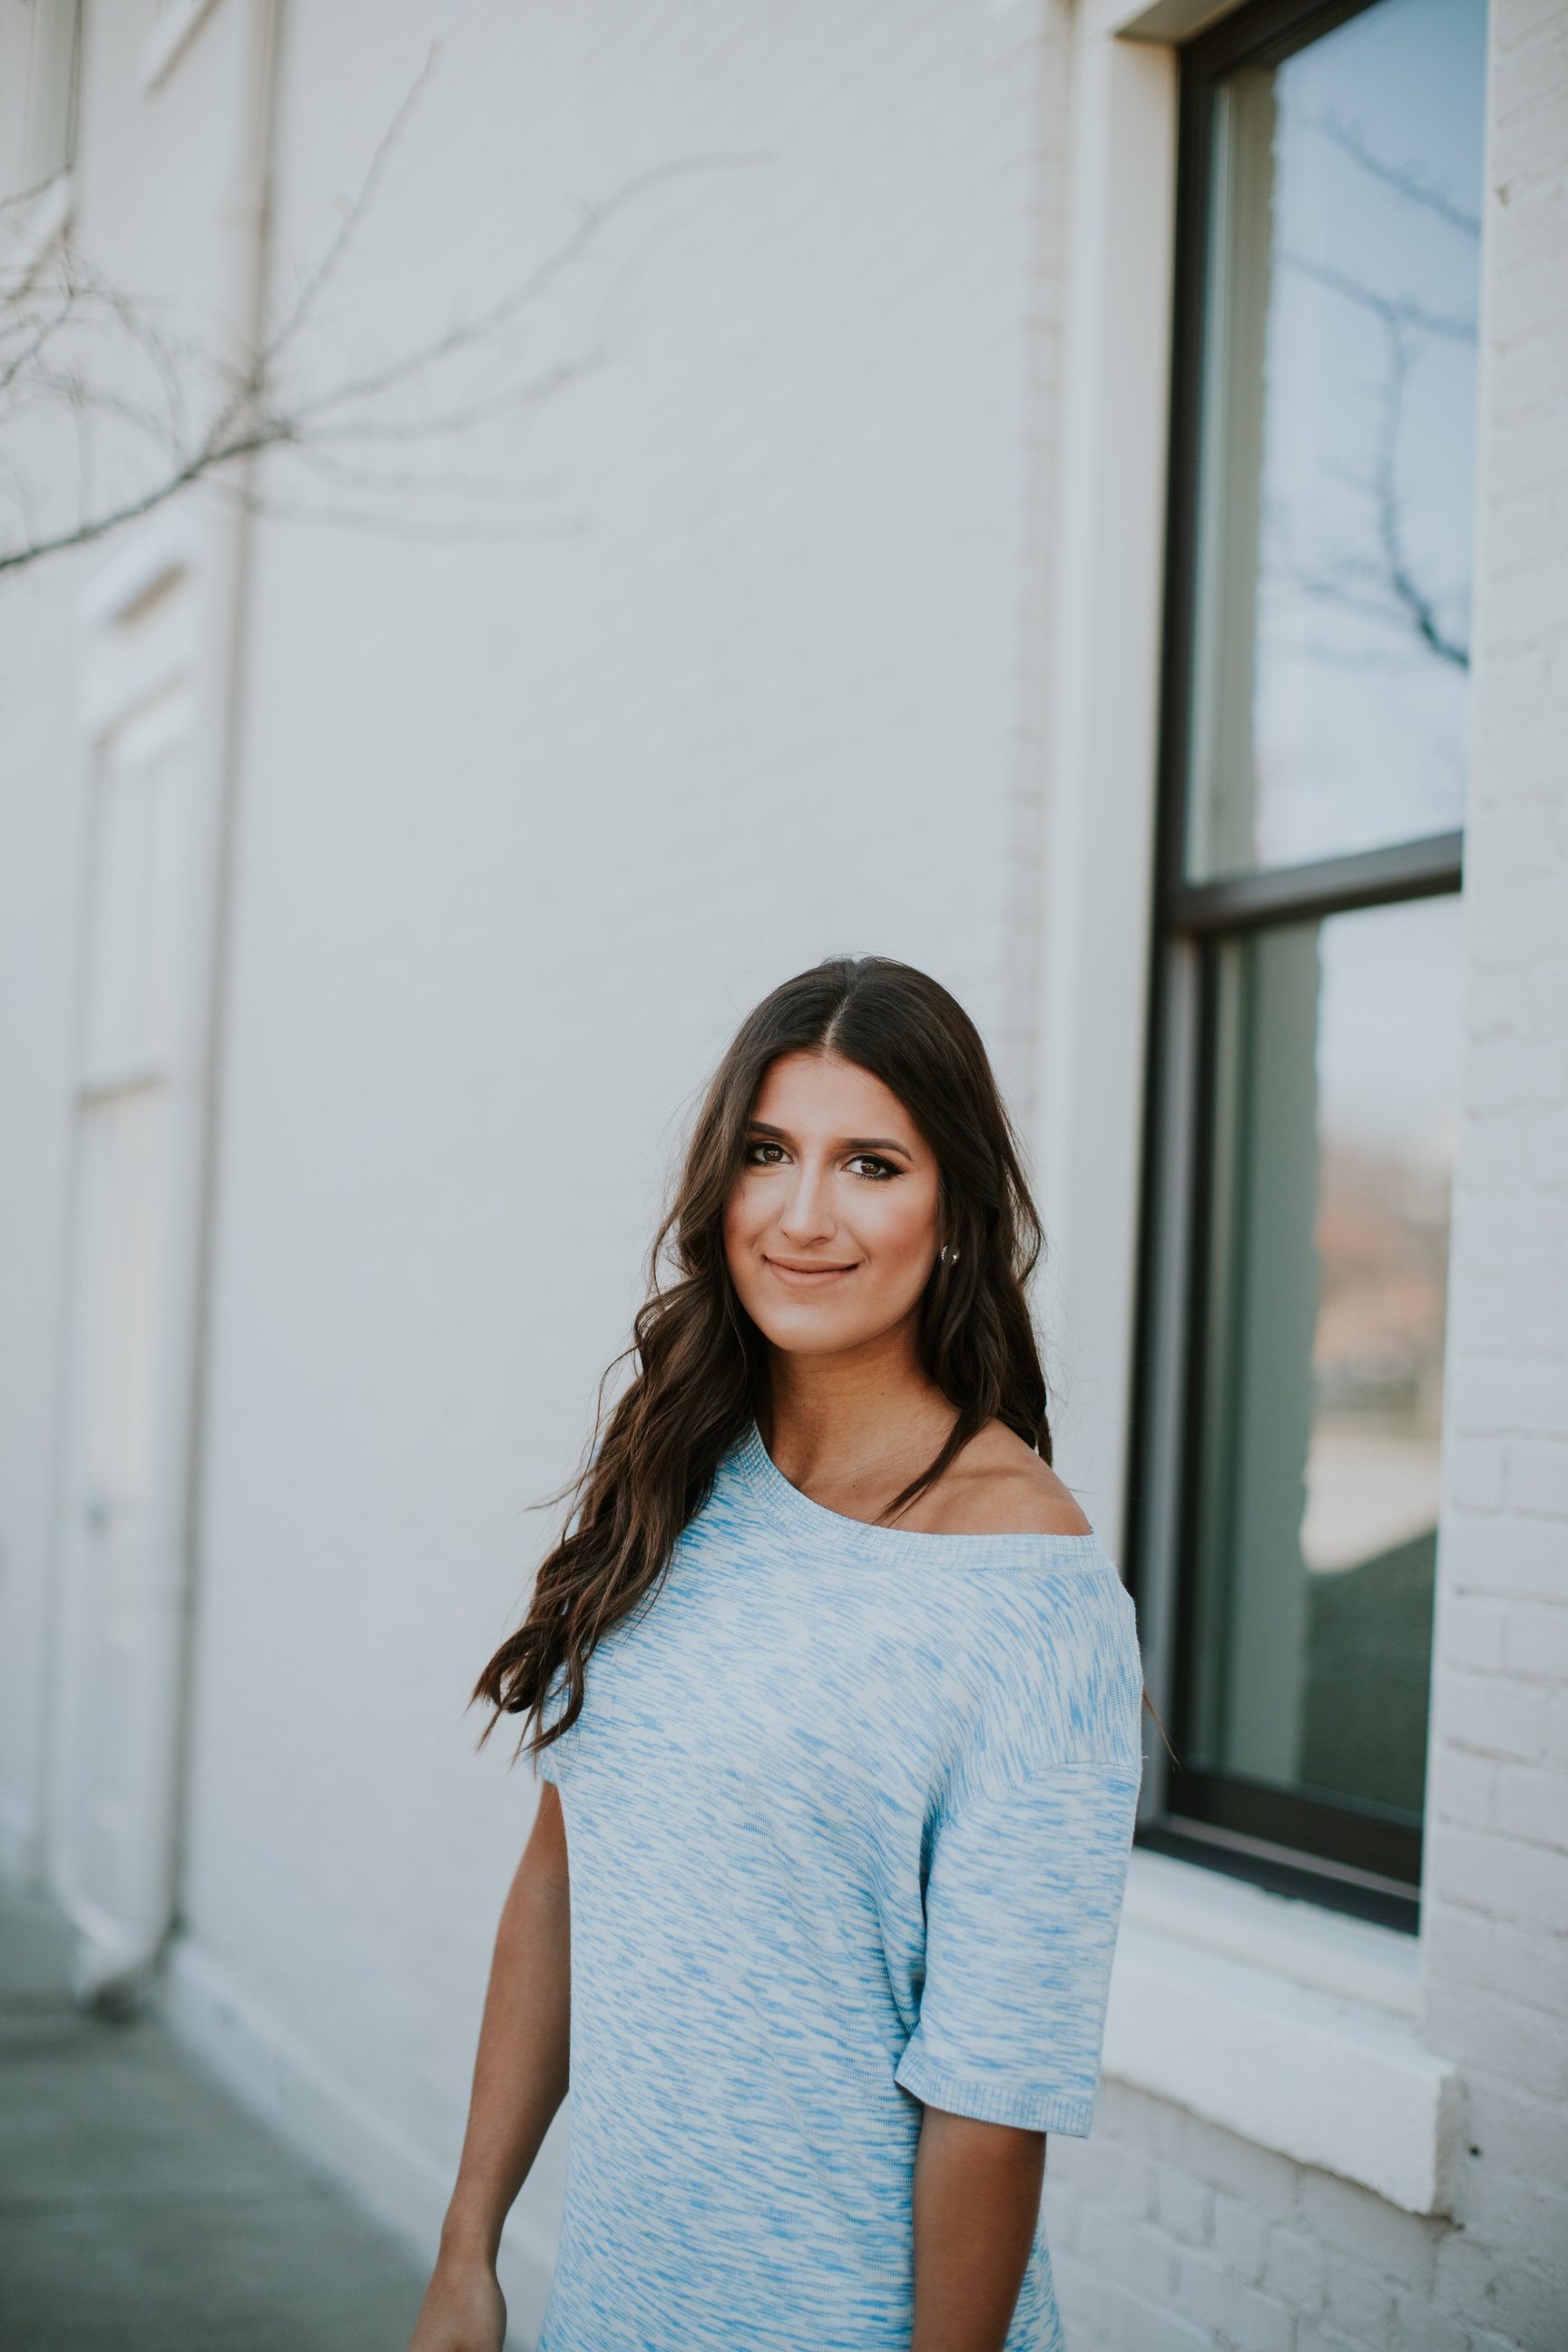 off the shoulder sweater dress, minkpink sweater dress, over the knee boots, tory burch robinson square pebbled tote, dolce vita boots, spring fashion, spring style, spring outfit // grace wainwright a southern drawl